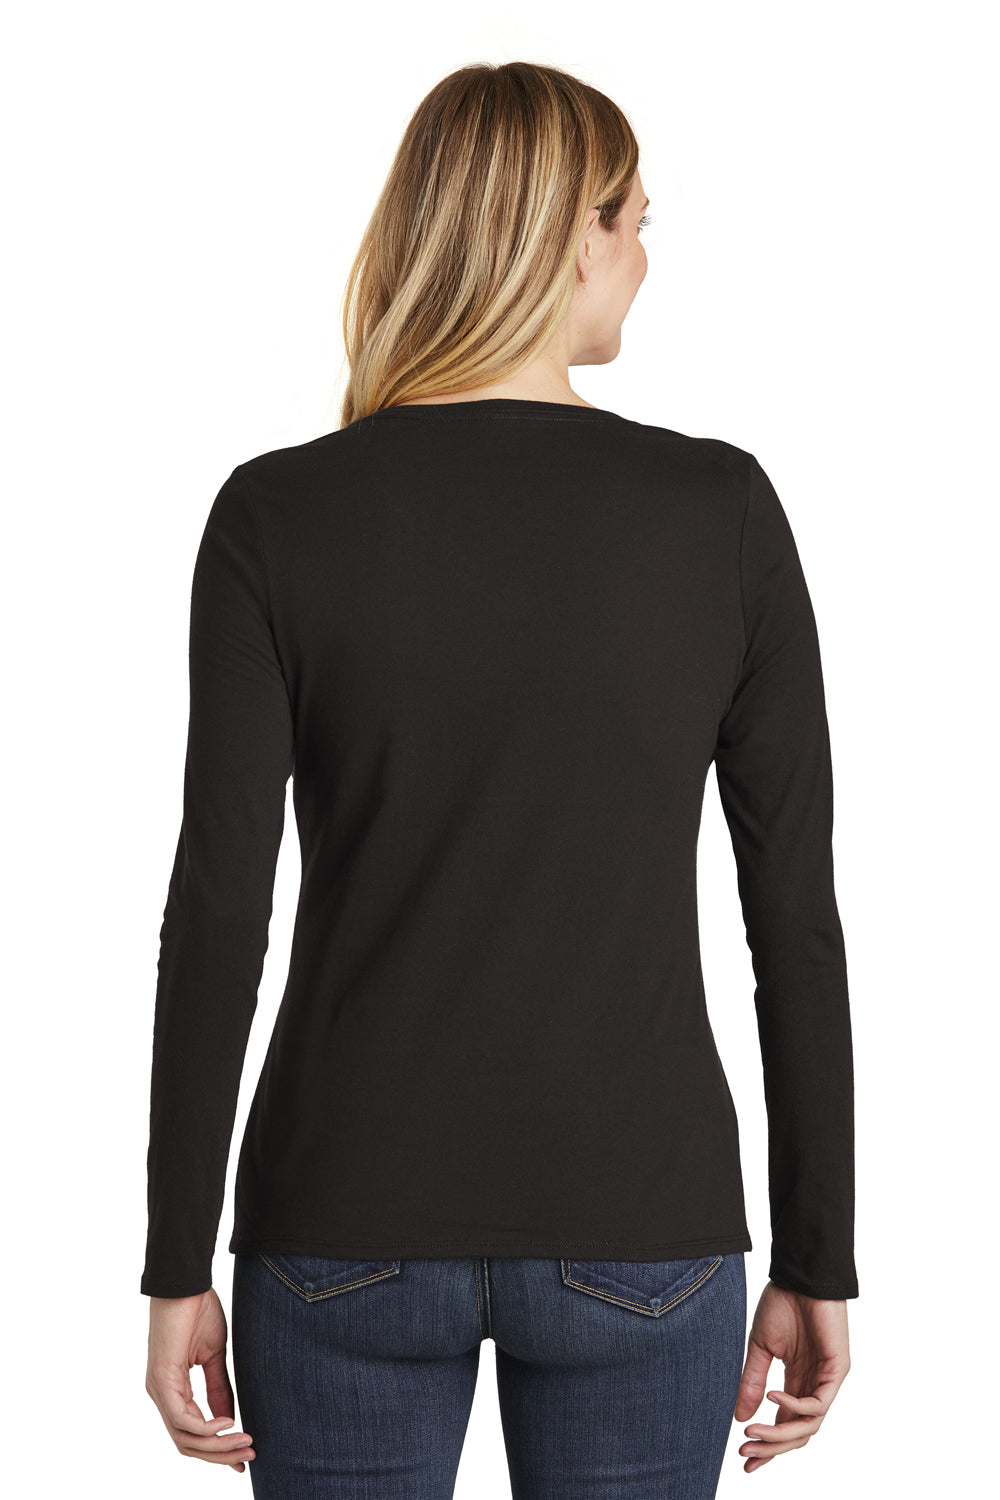 District DT6201 Womens Very Important Long Sleeve V-Neck T-Shirts Black Back